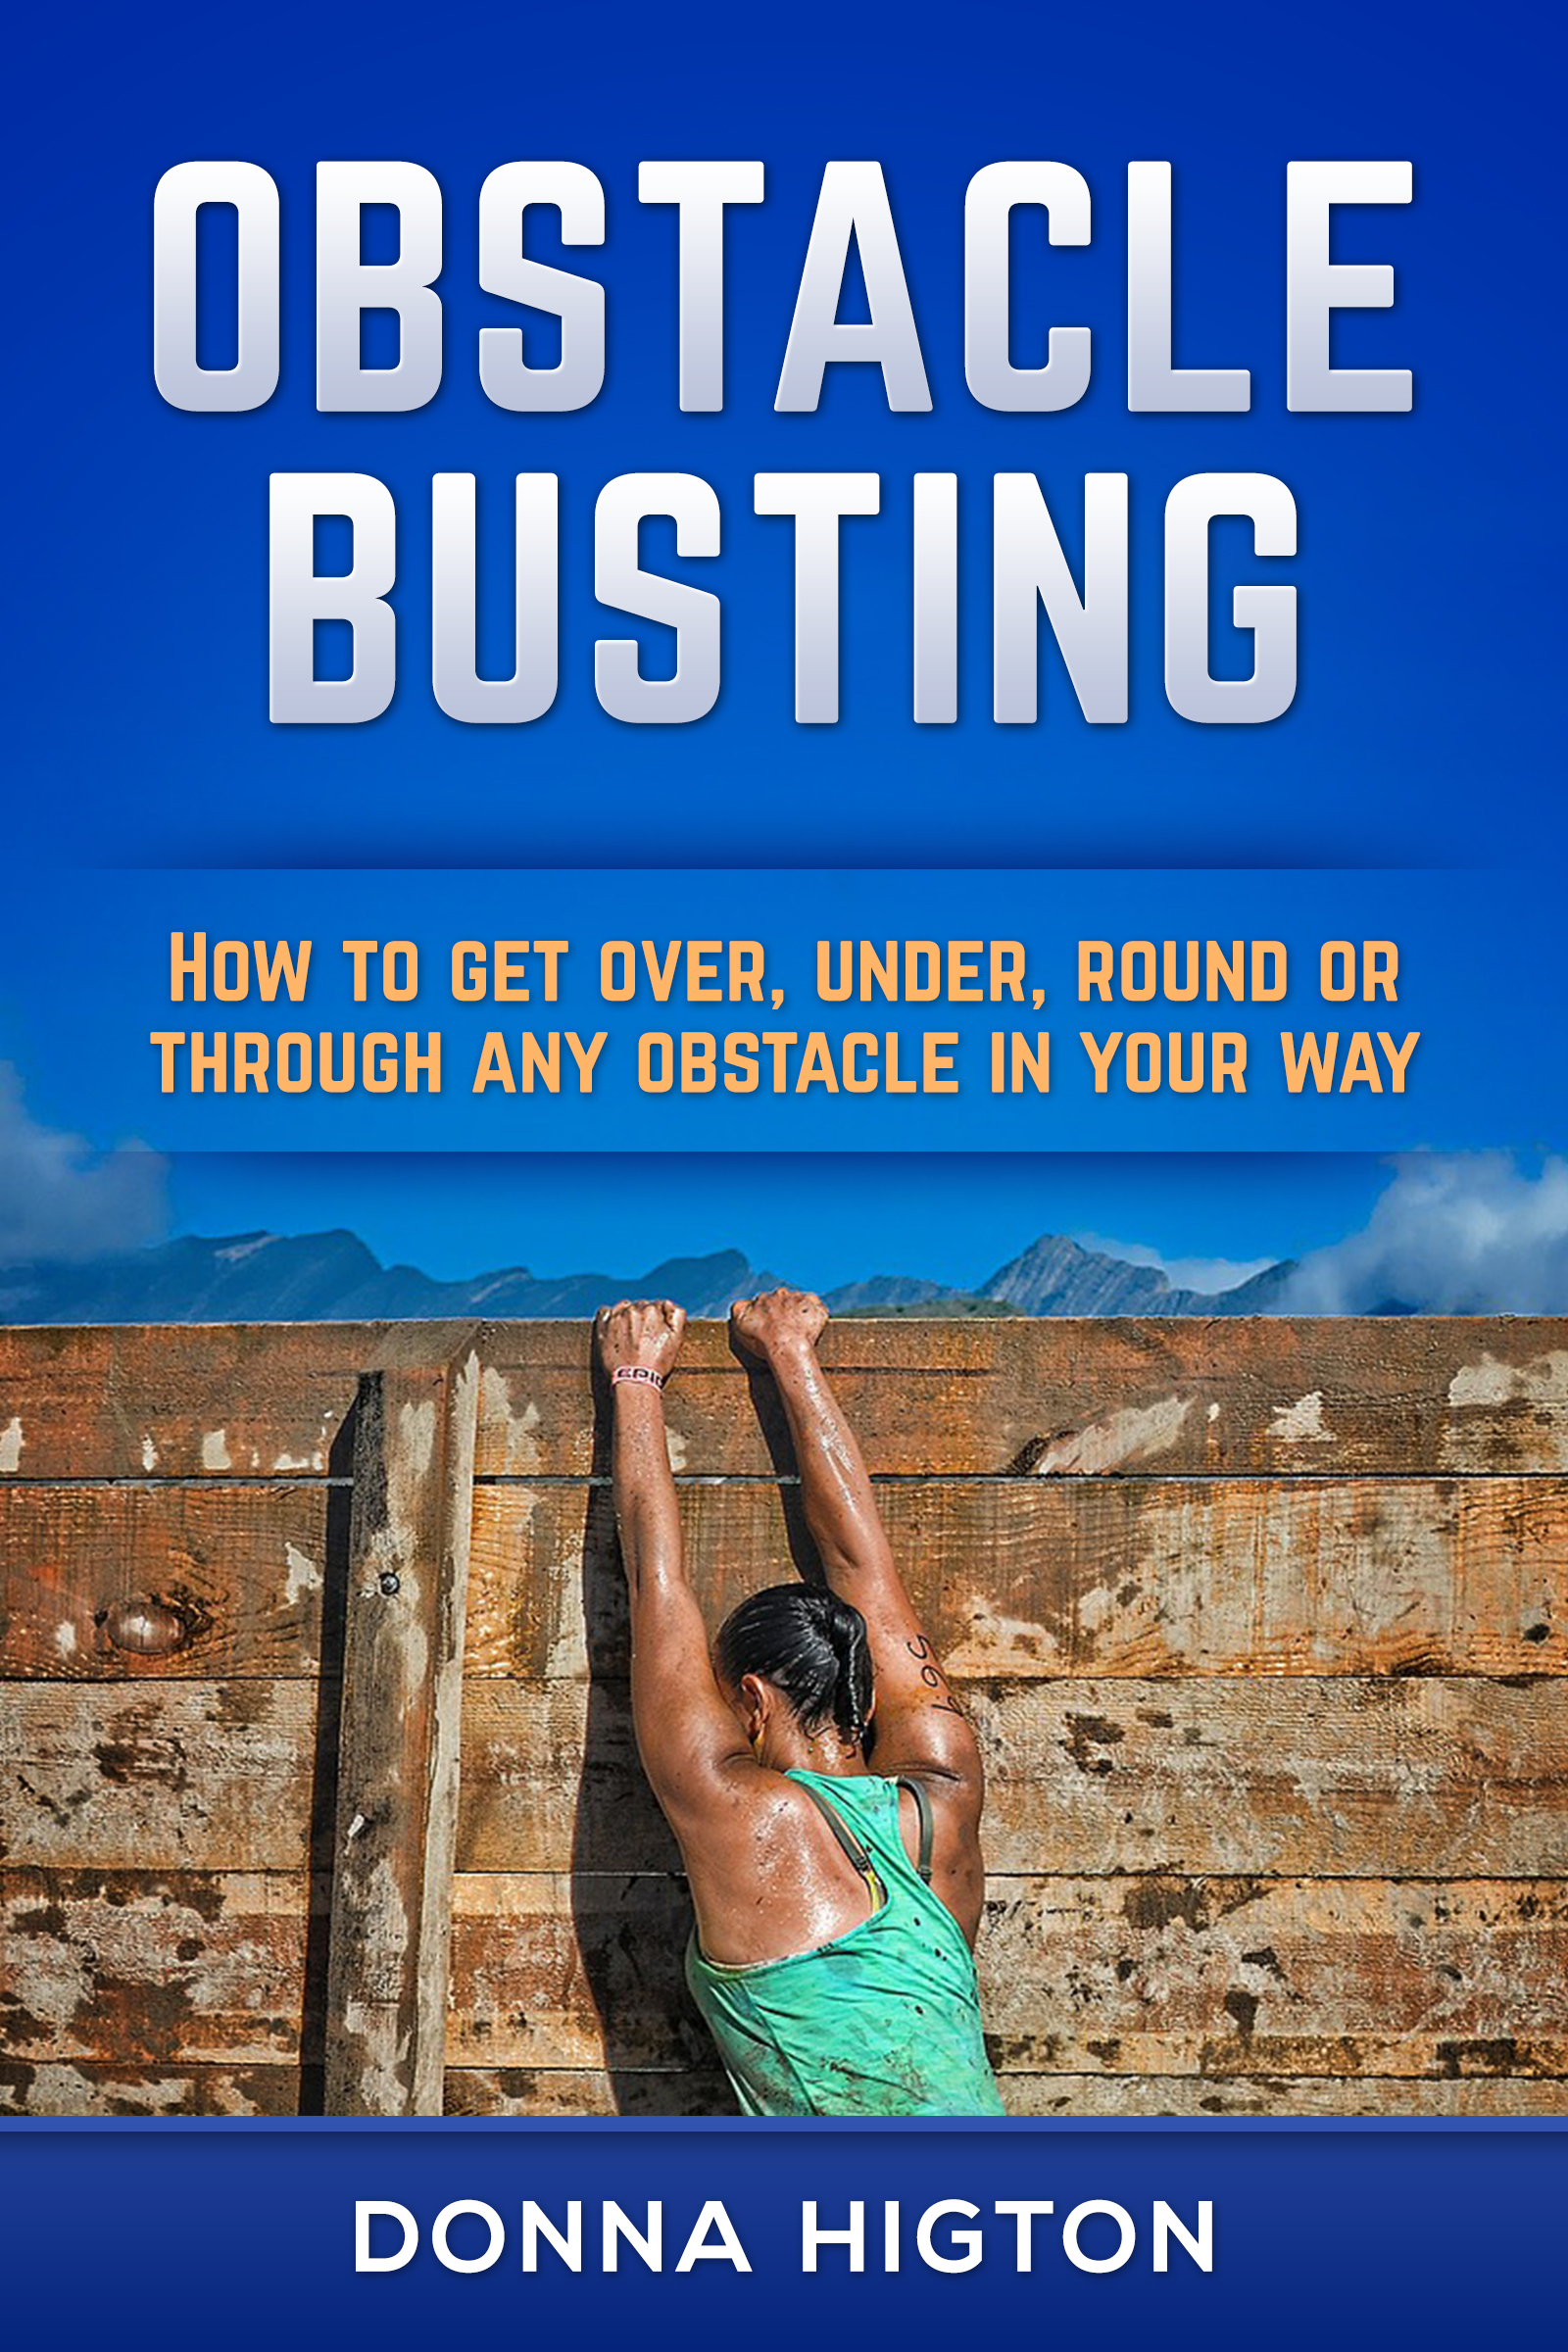 FREE: Obstacle Busting by Donna Higton